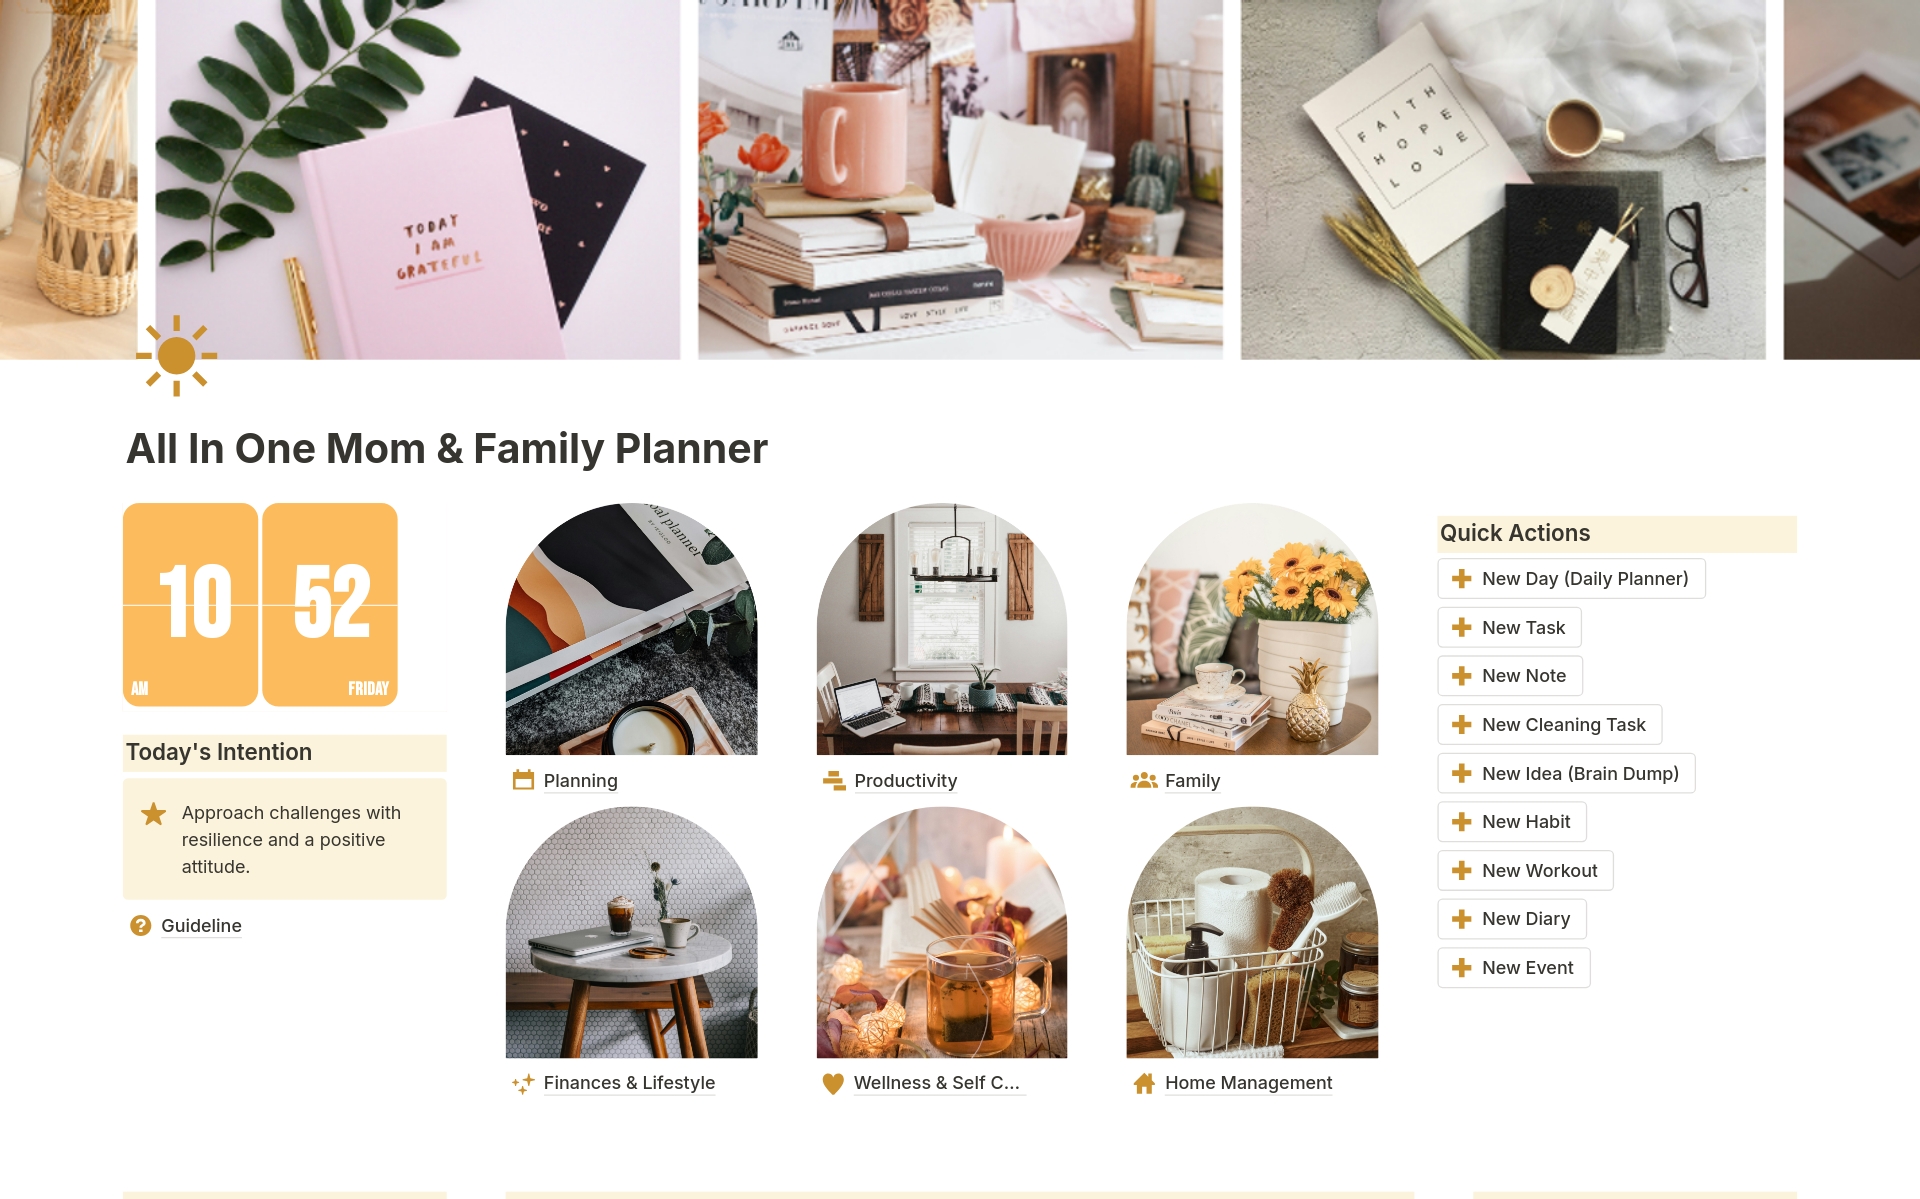 Transform Your Family Life with the All in One Notion Mom and Family Planner! This Aesthetic Notion Template is Perfect for Busy Moms. Organize Your Daily Tasks, Manage Family Schedules, and Create a Central Family Hub. Streamline Your Life with Our User-Friendly Notion Planner!